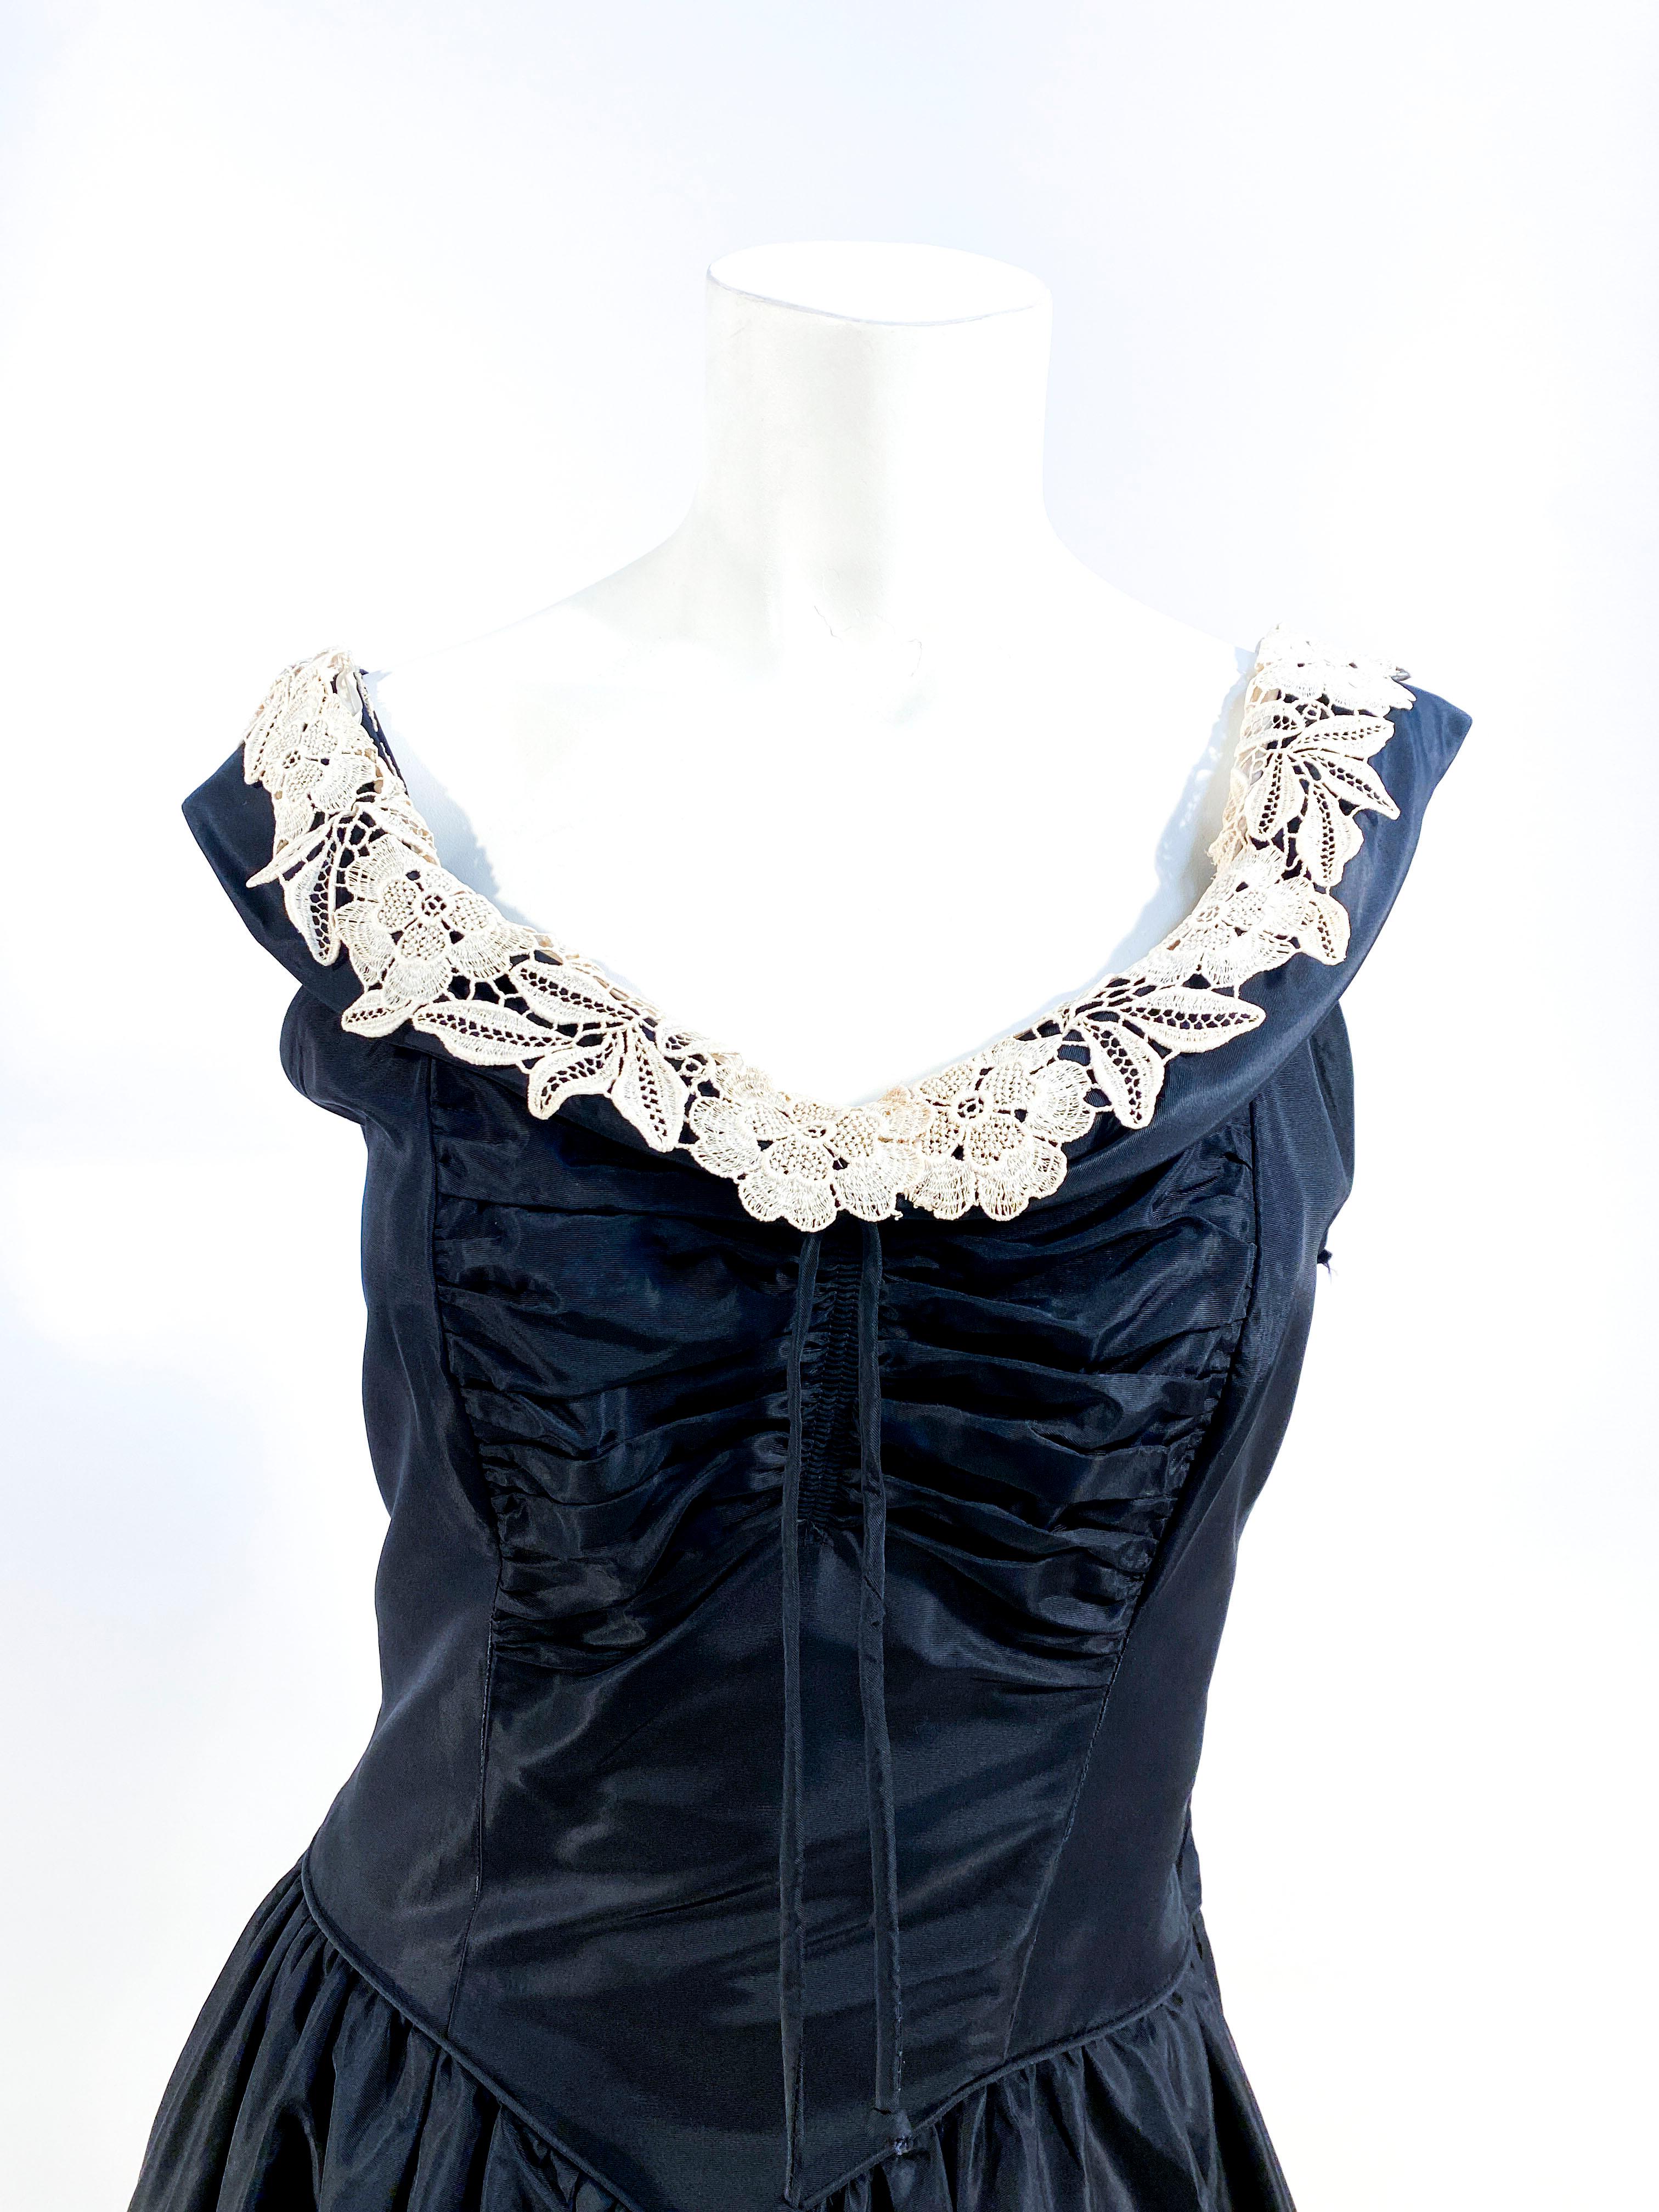 Early 1940s custom made black taffeta evening gown with a fitted, ruched, and tied bust. The boat neckline is rounded with a lace accent rolled over the collar. The bodice is sleeveless and the side has a metal zipper. The piped waist band has